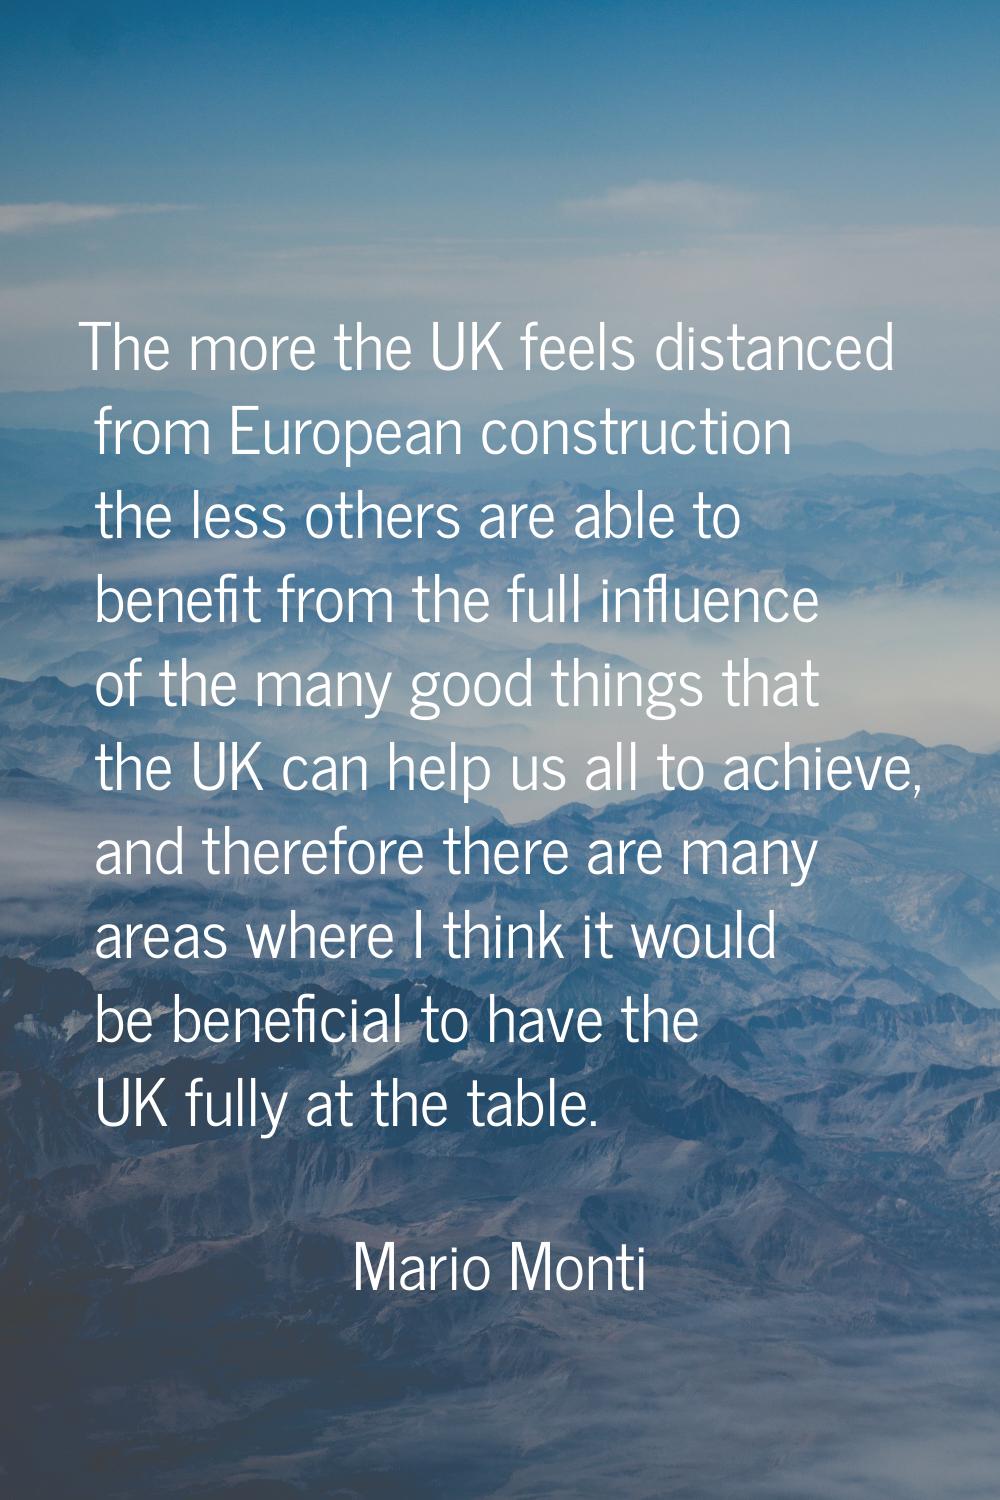 The more the UK feels distanced from European construction the less others are able to benefit from